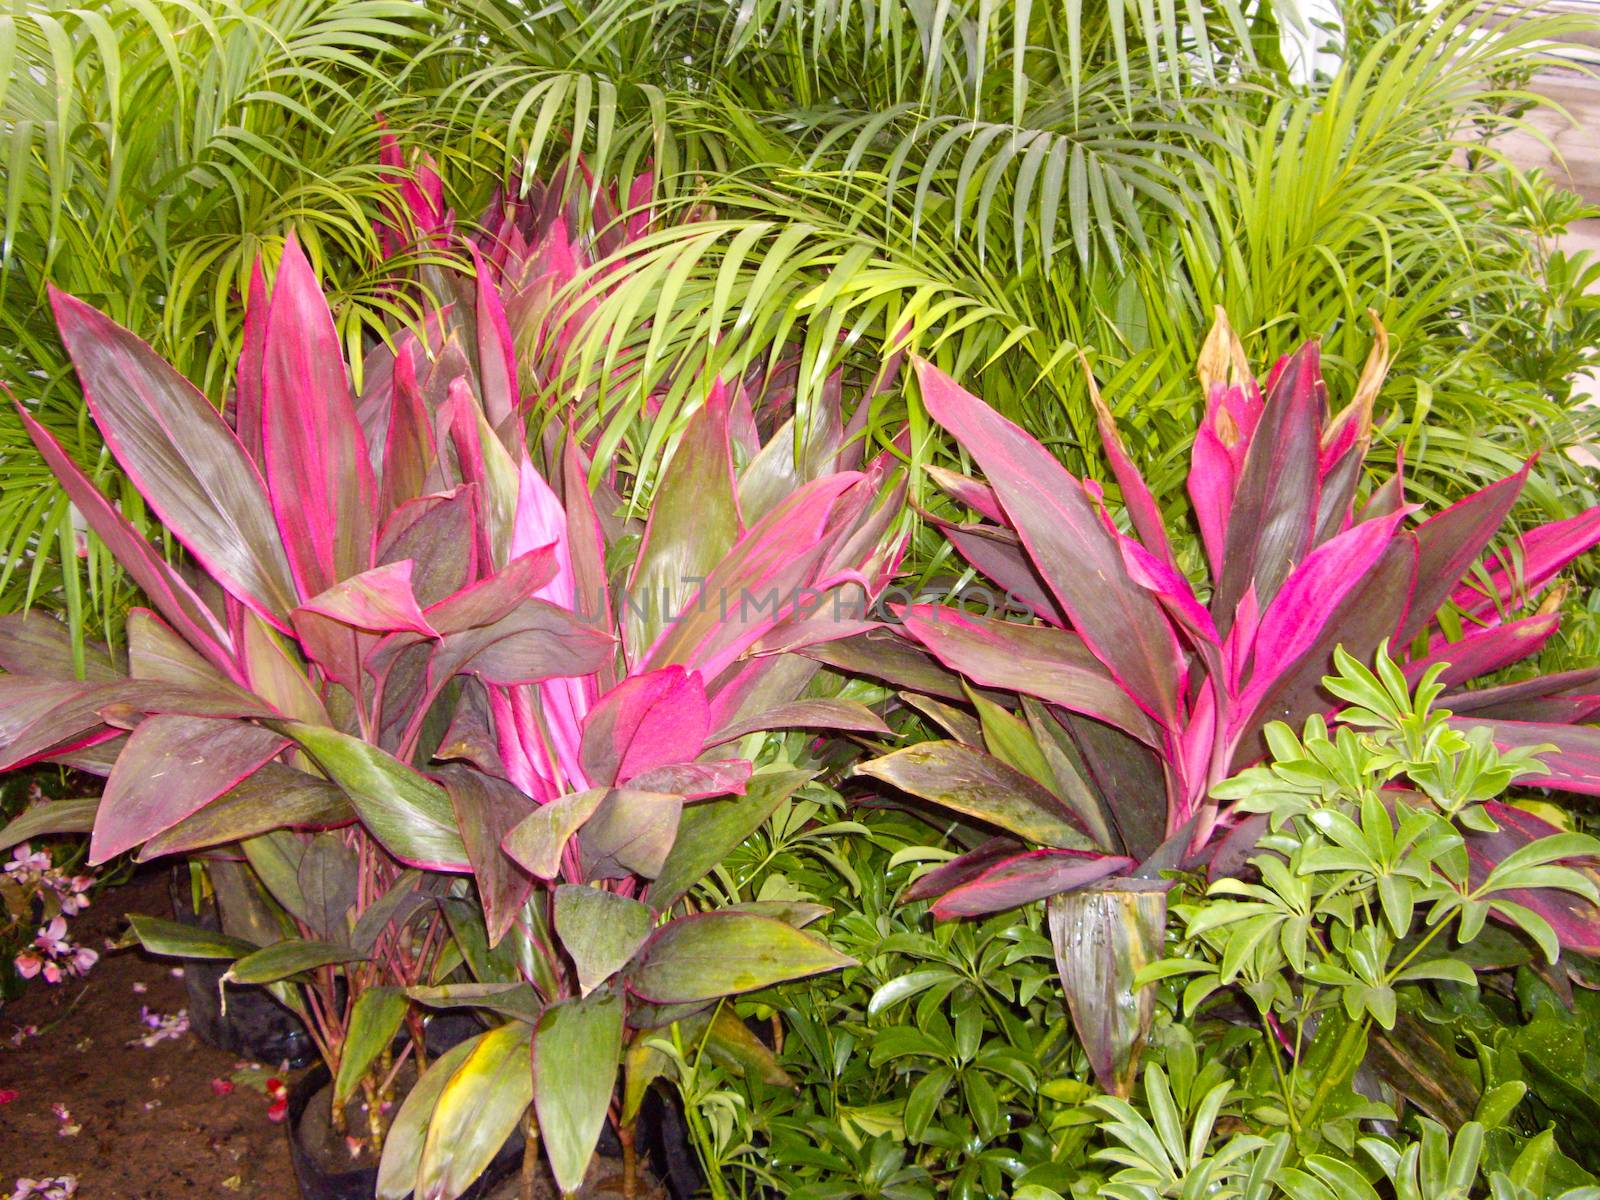 Leaves of red and green on lush plants